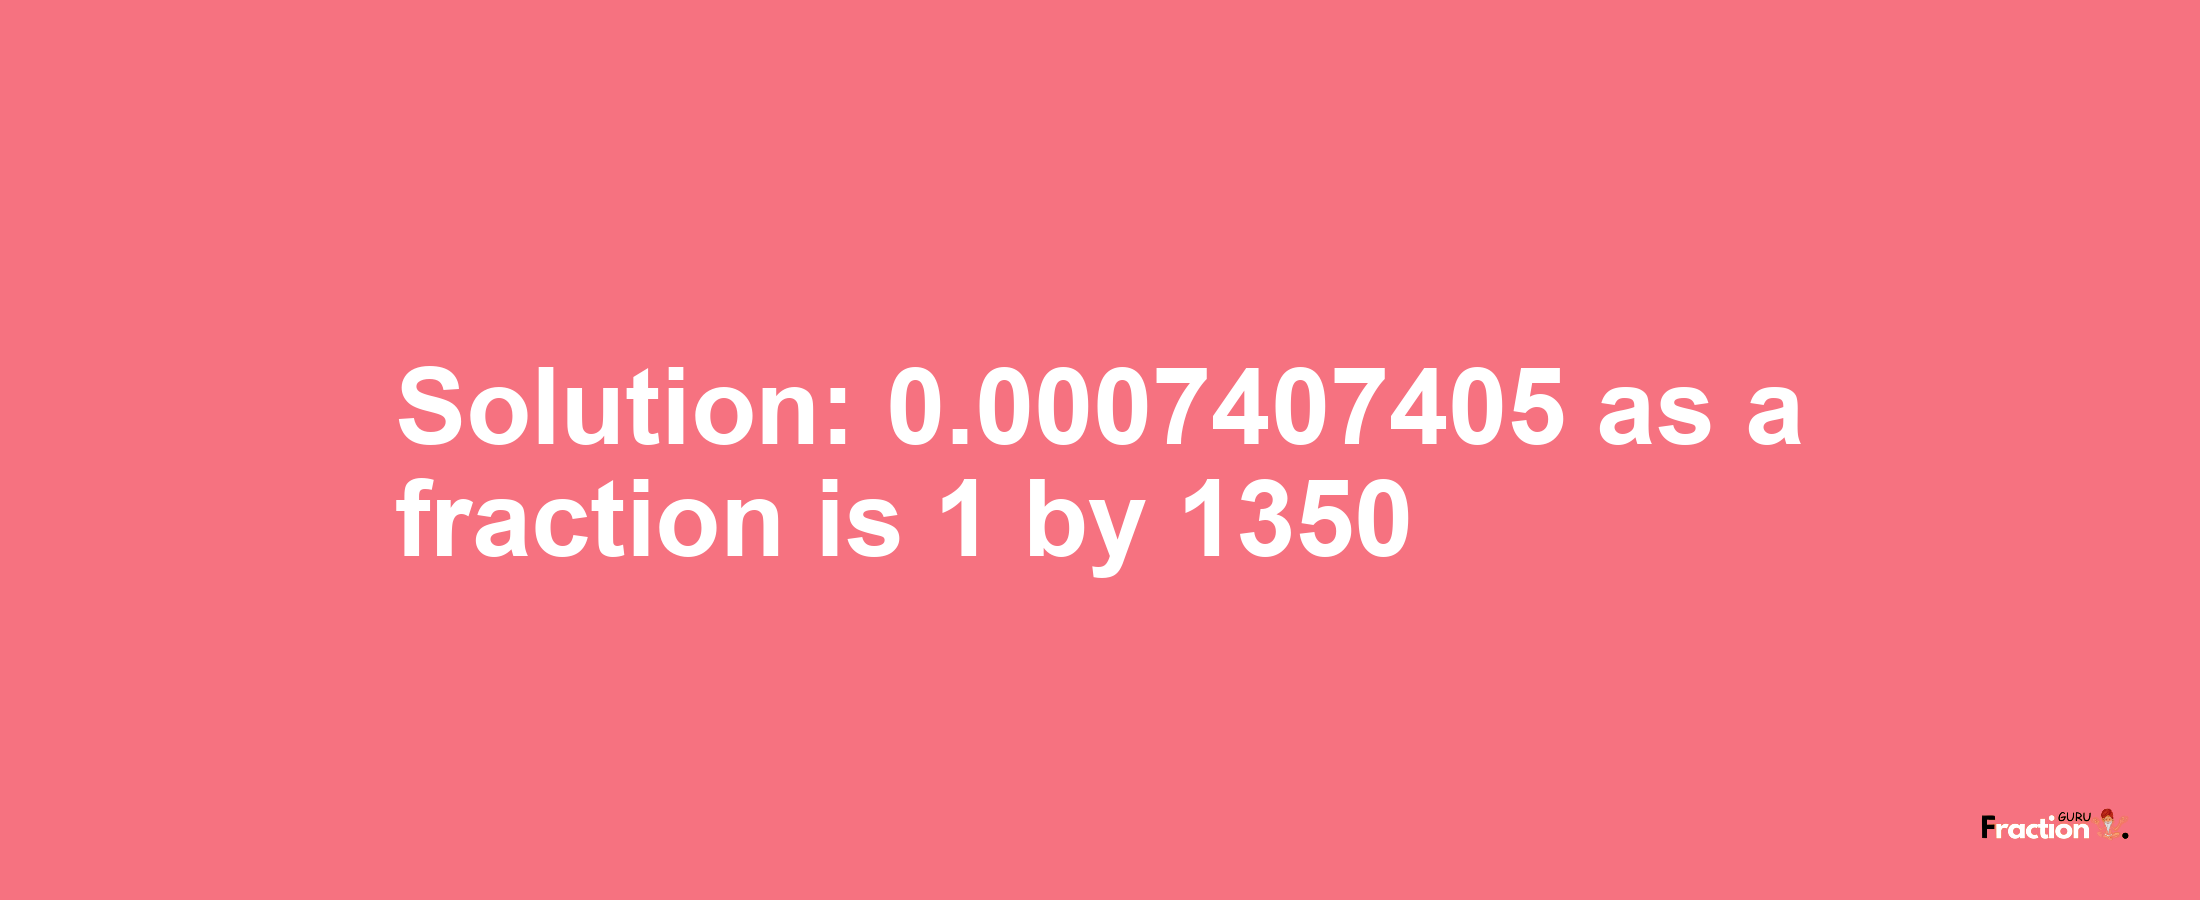 Solution:0.0007407405 as a fraction is 1/1350